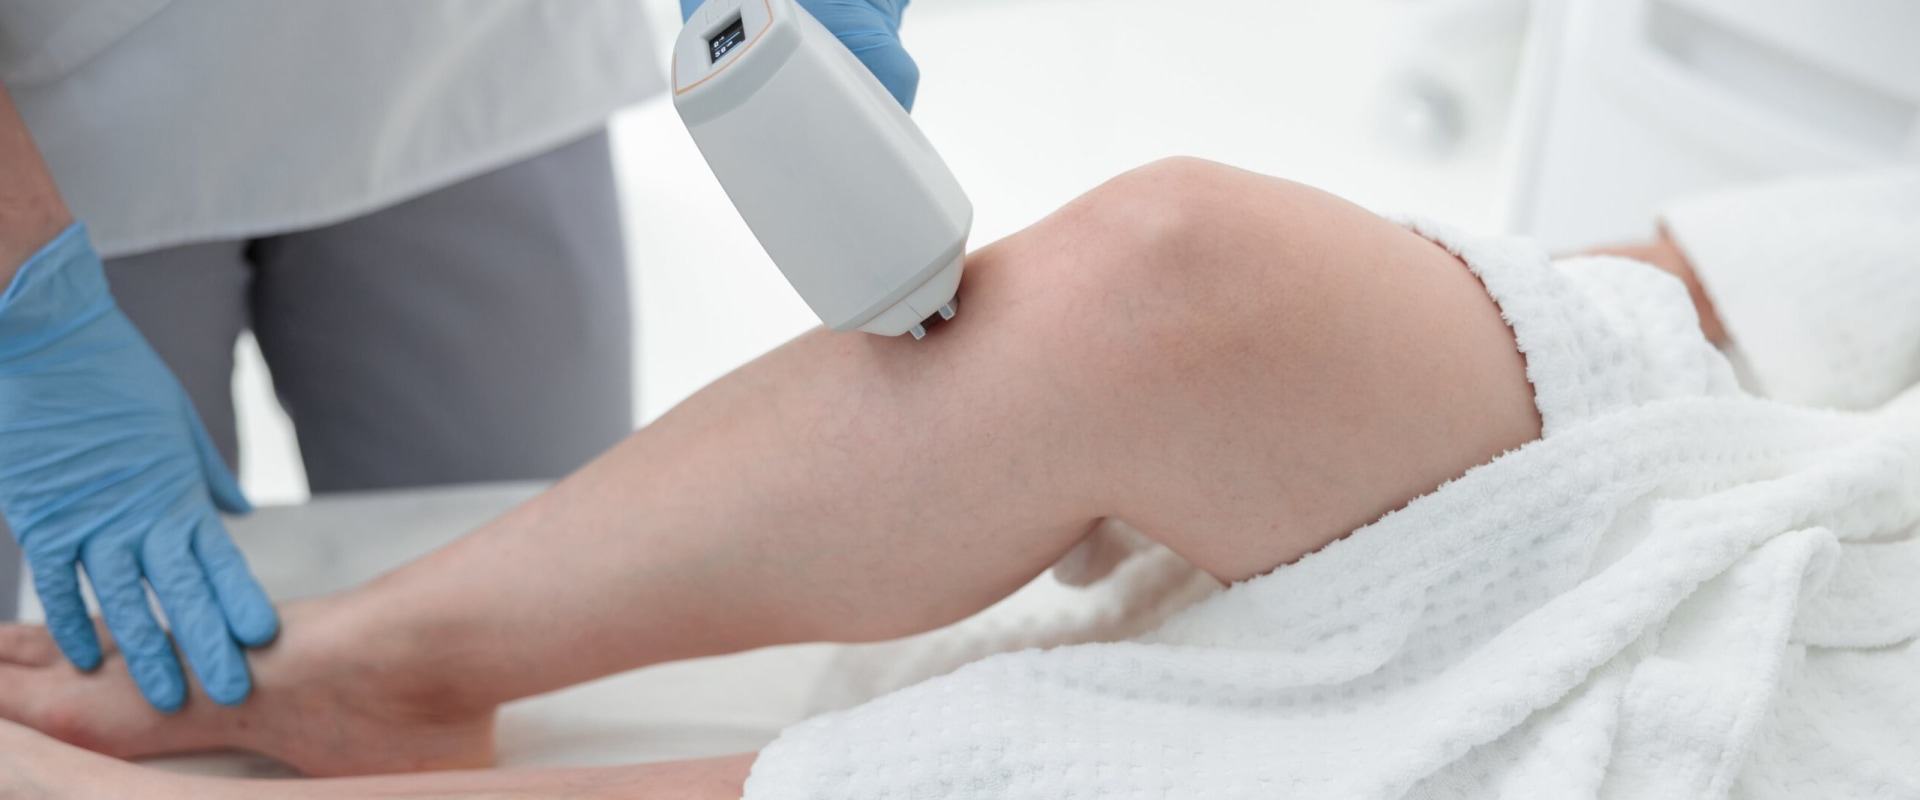 Can Laser Hair Removal Cause Infertility? - Debunking the Myth